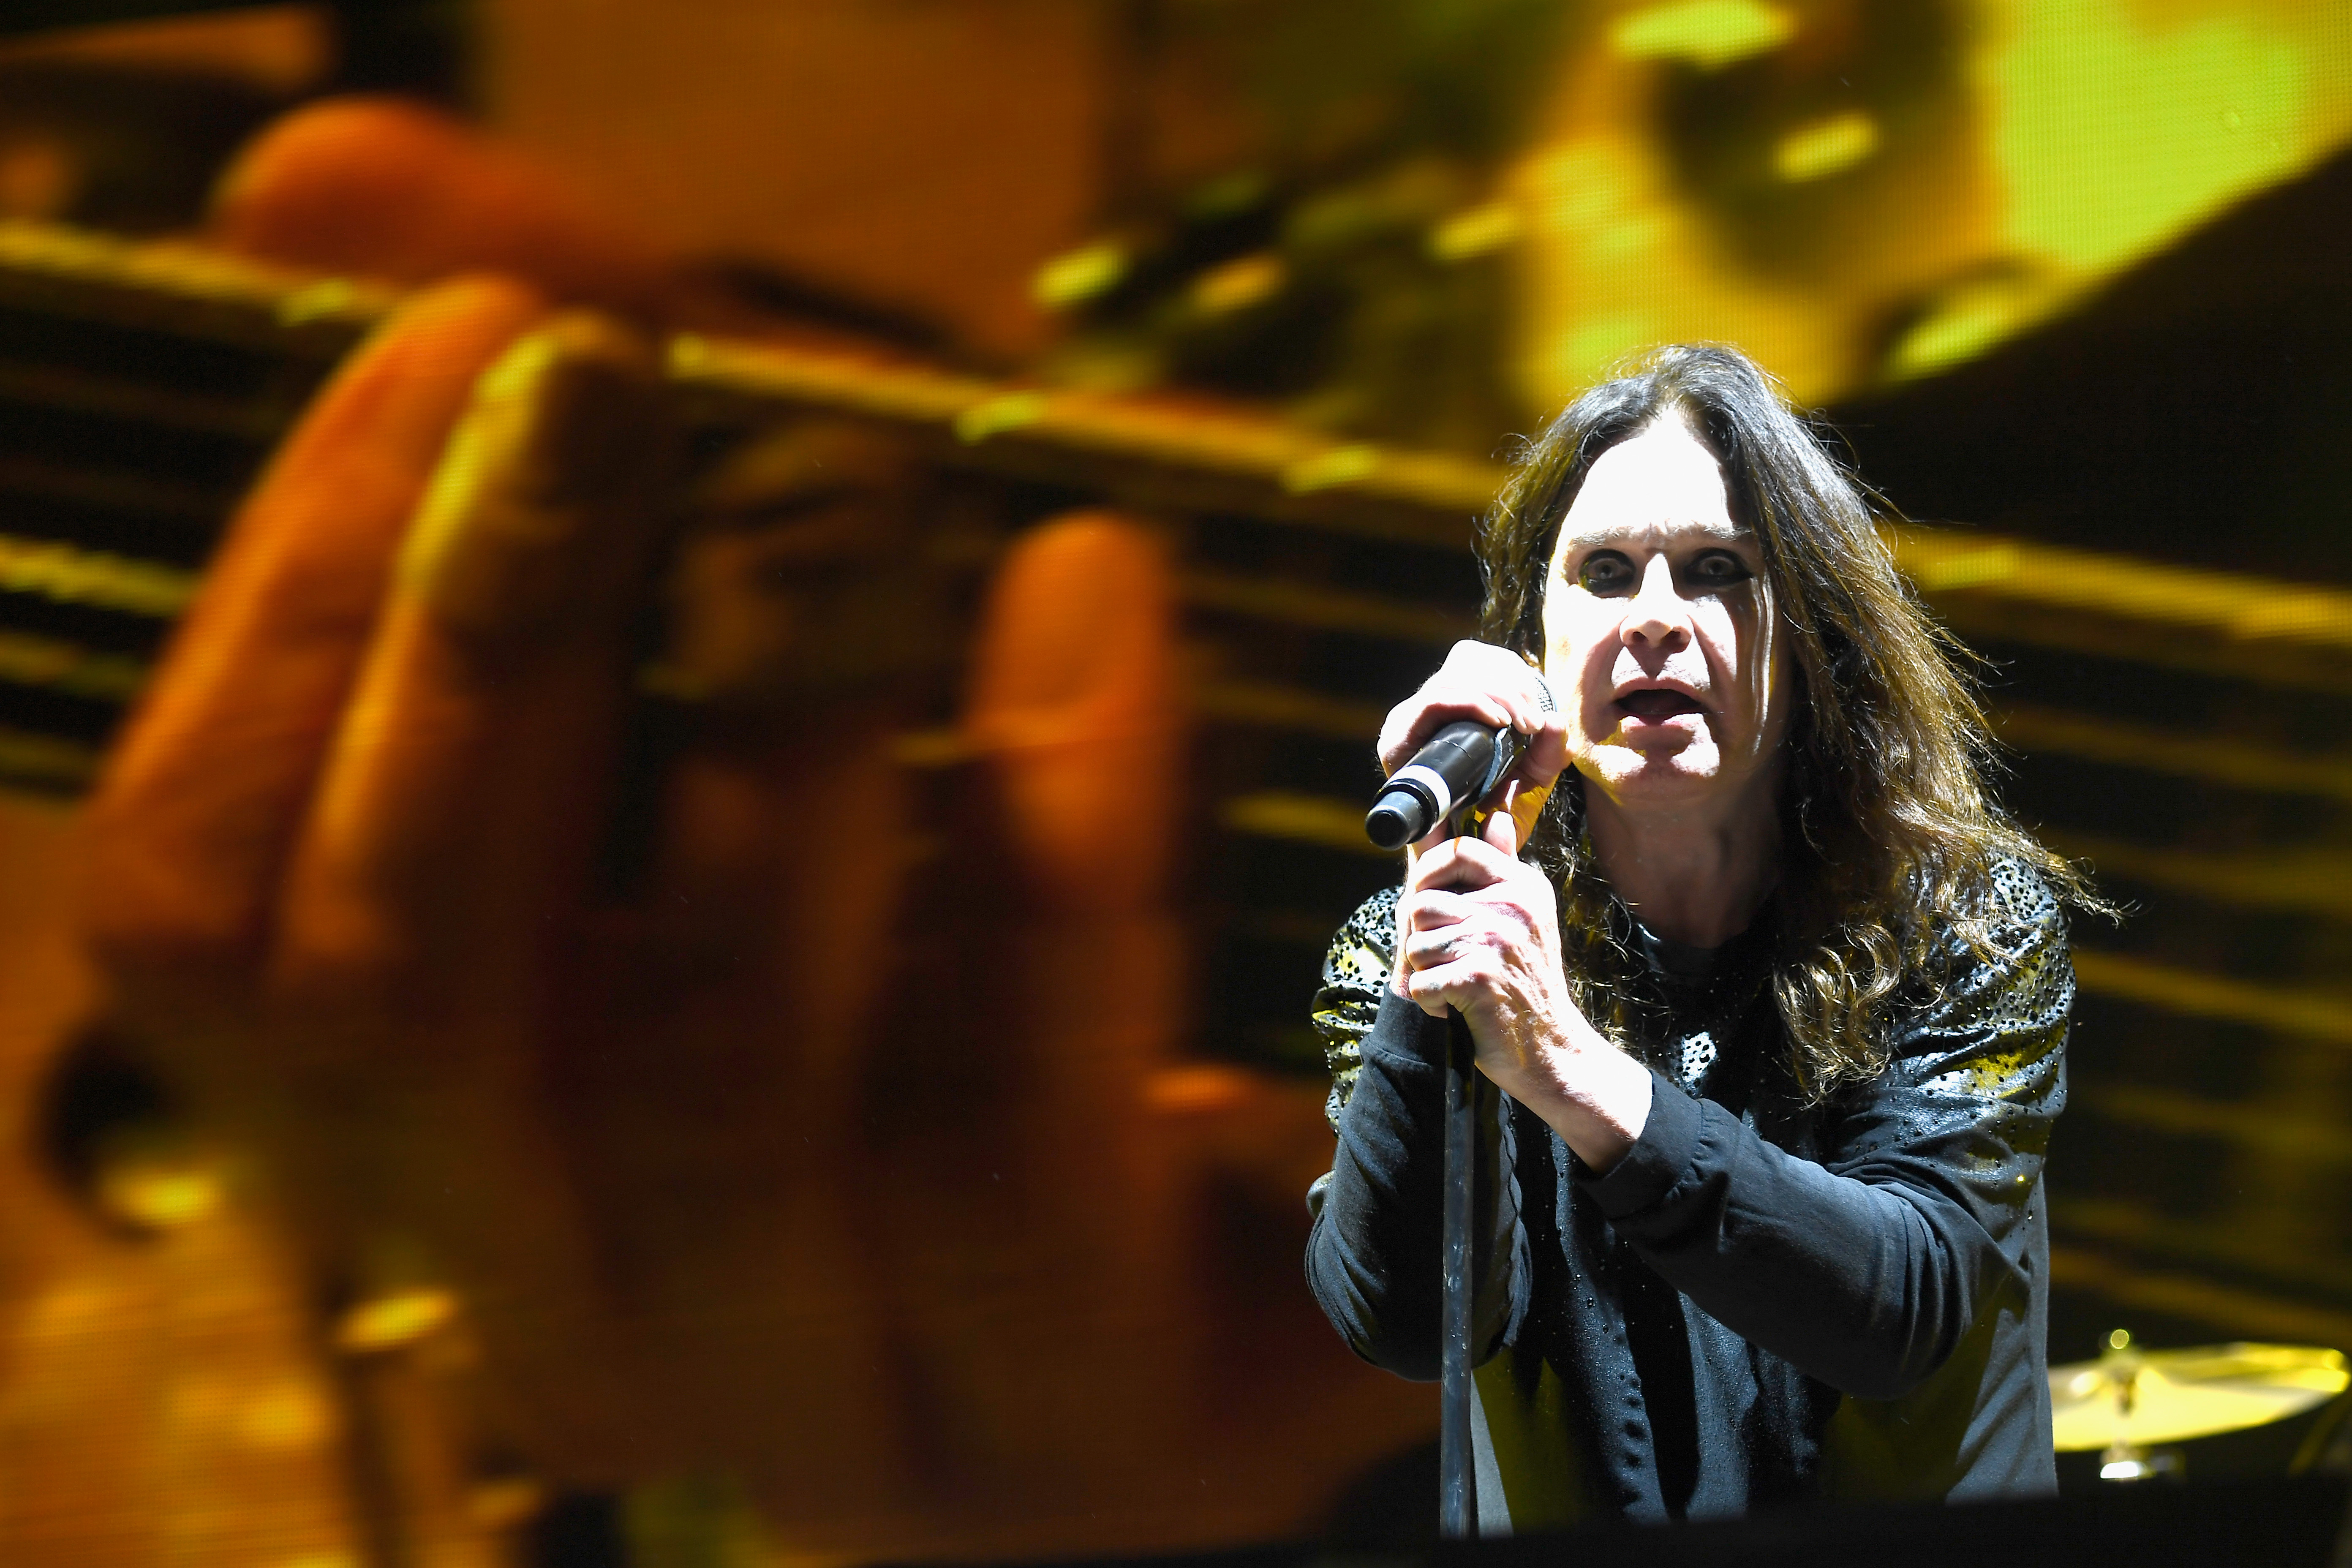 LOS ANGELES, CA - SEPTEMBER 24: Ozzy Osbourne of Black Sabbath performs at Ozzfest 2016 at San Manuel Amphitheater on September 24, 2016 in Los Angeles, California. (Photo by Frazer Harrison/Getty Images for ABA)